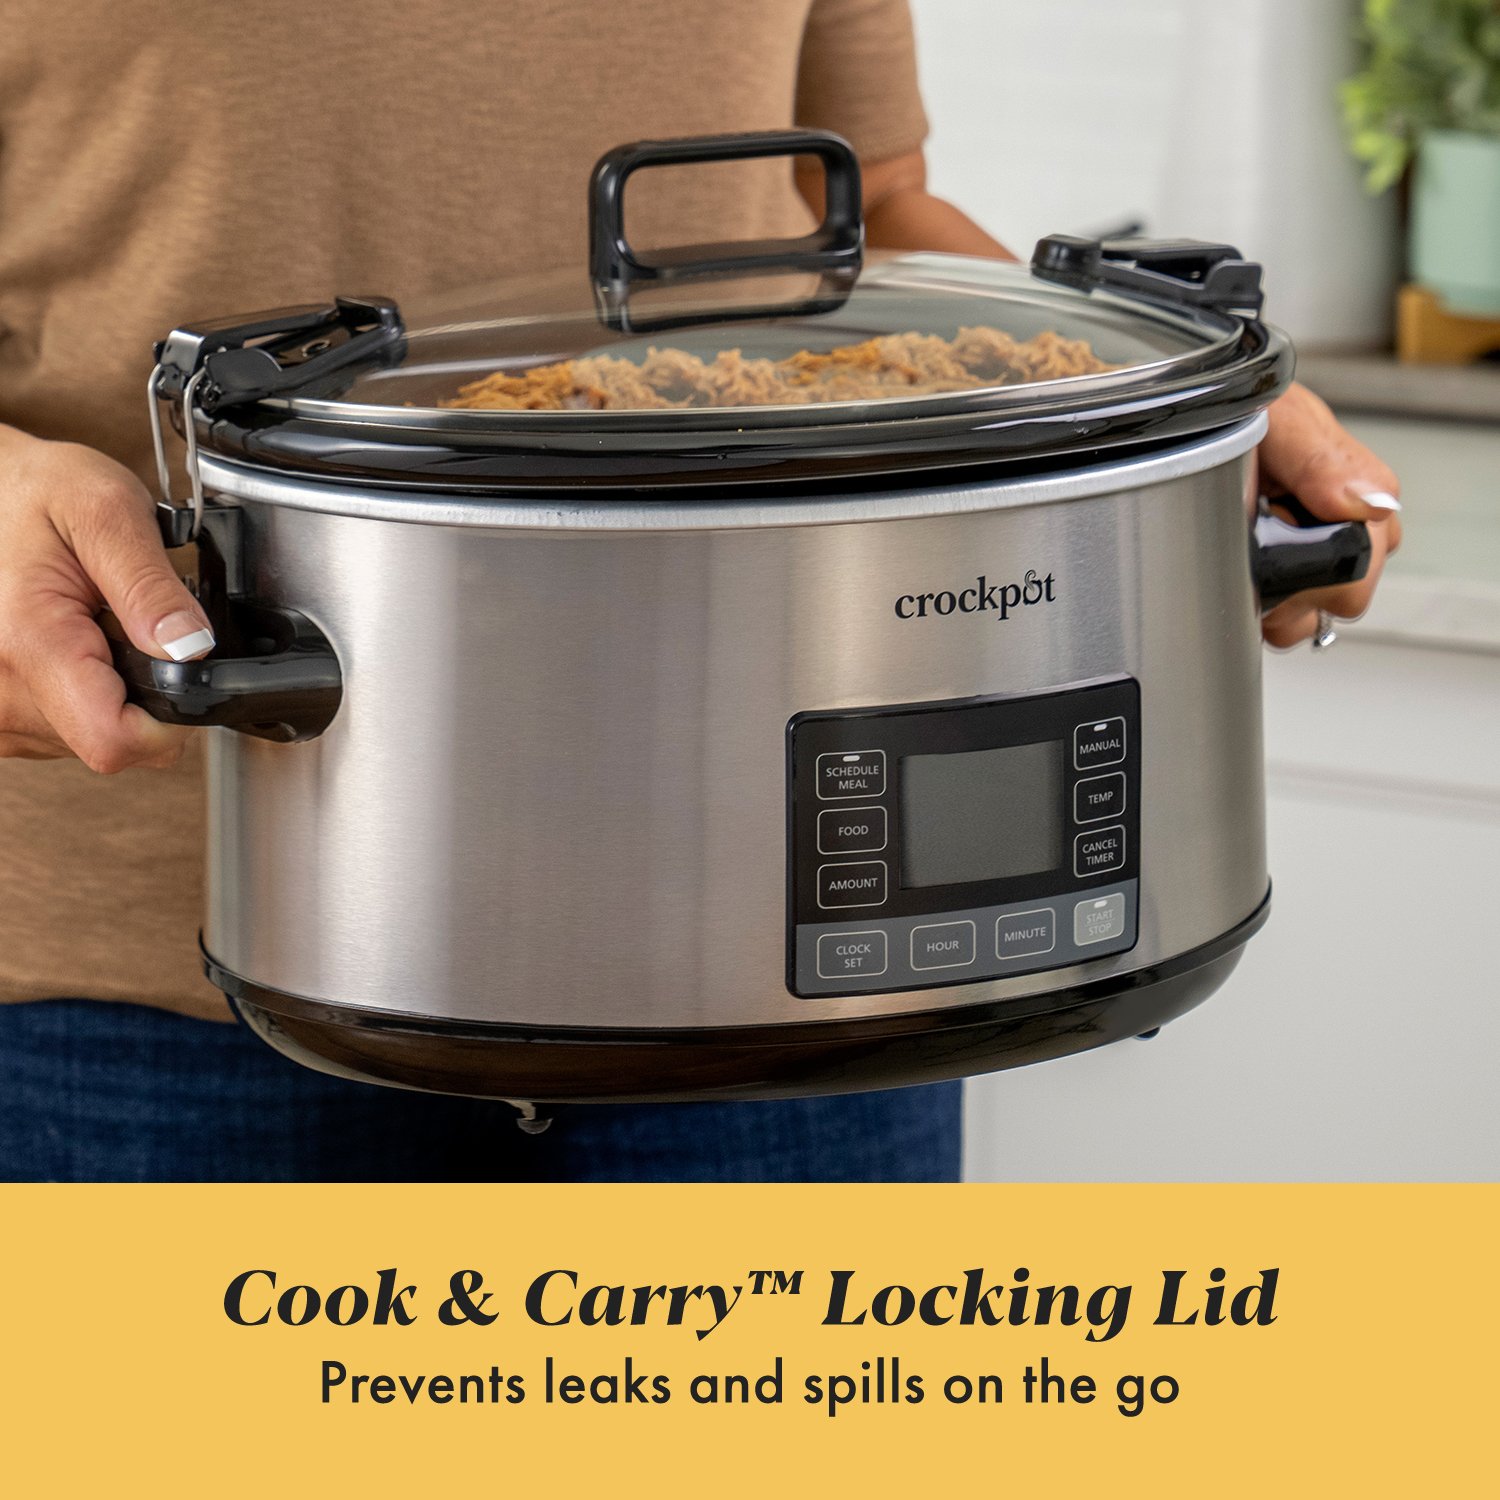 This Mini Crockpot Will ave You *Major* Microwave Time